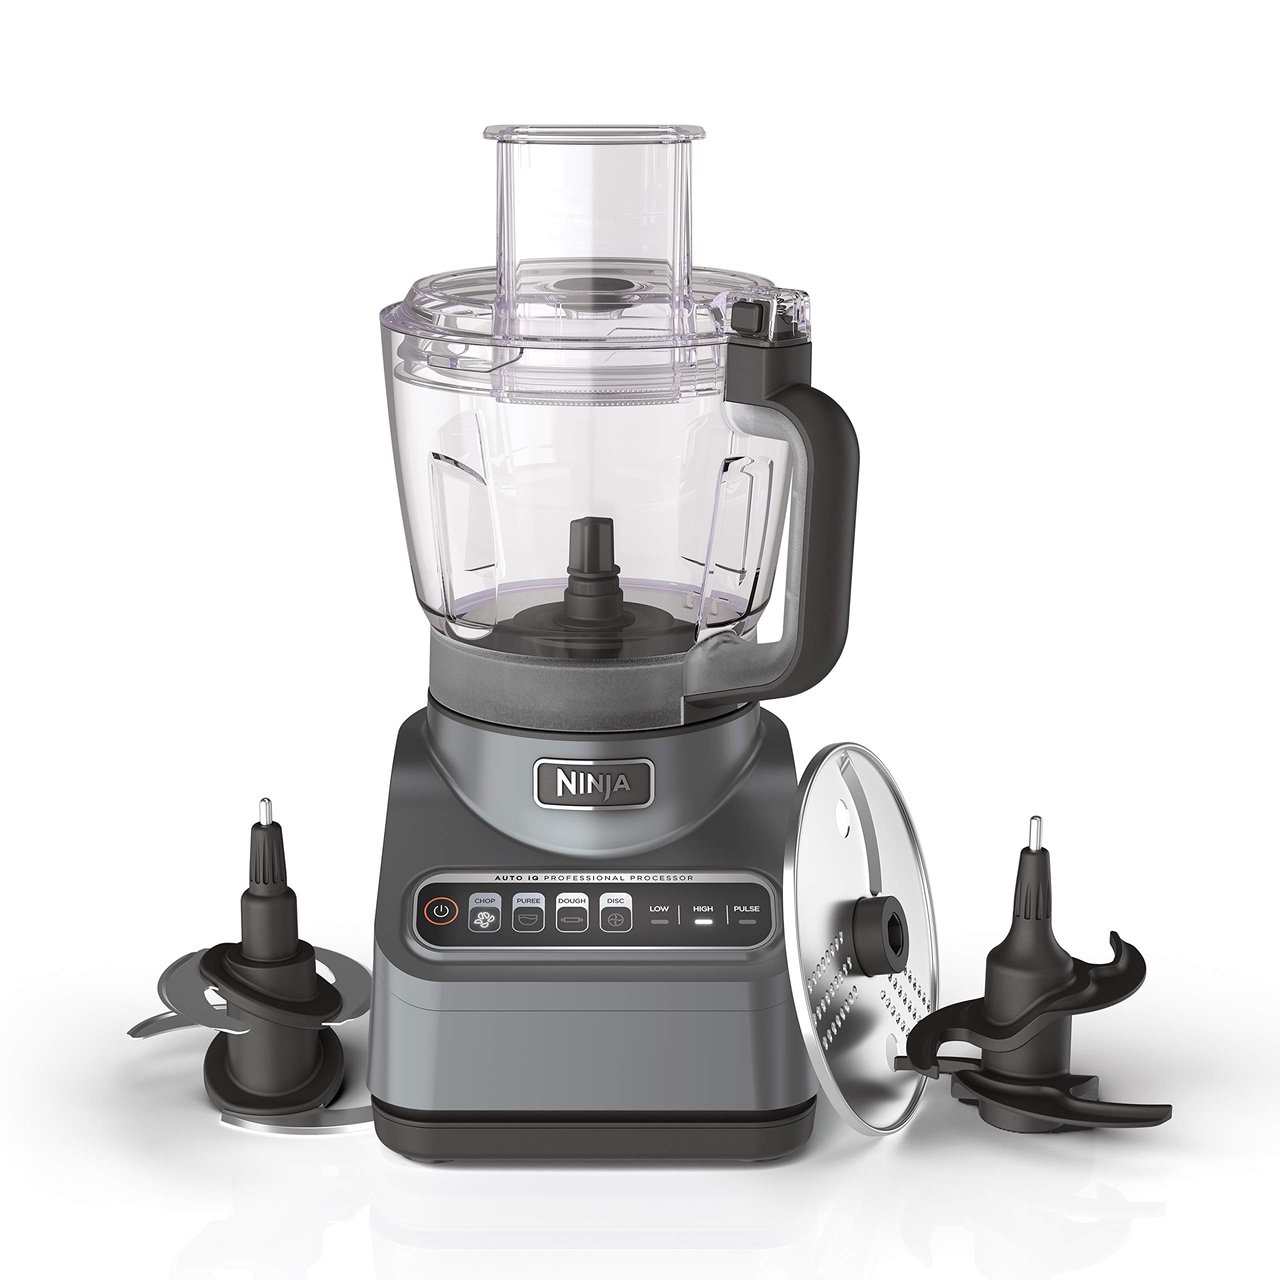 2 Ninja BN601 Professional Plus Food Processor, 1000 Peak Watts, 4 Functions for Chopping, Slicing, Purees & Dough with 9-Cup Processor Bowl, 3 Blades, Food Chute & Pusher, Silver